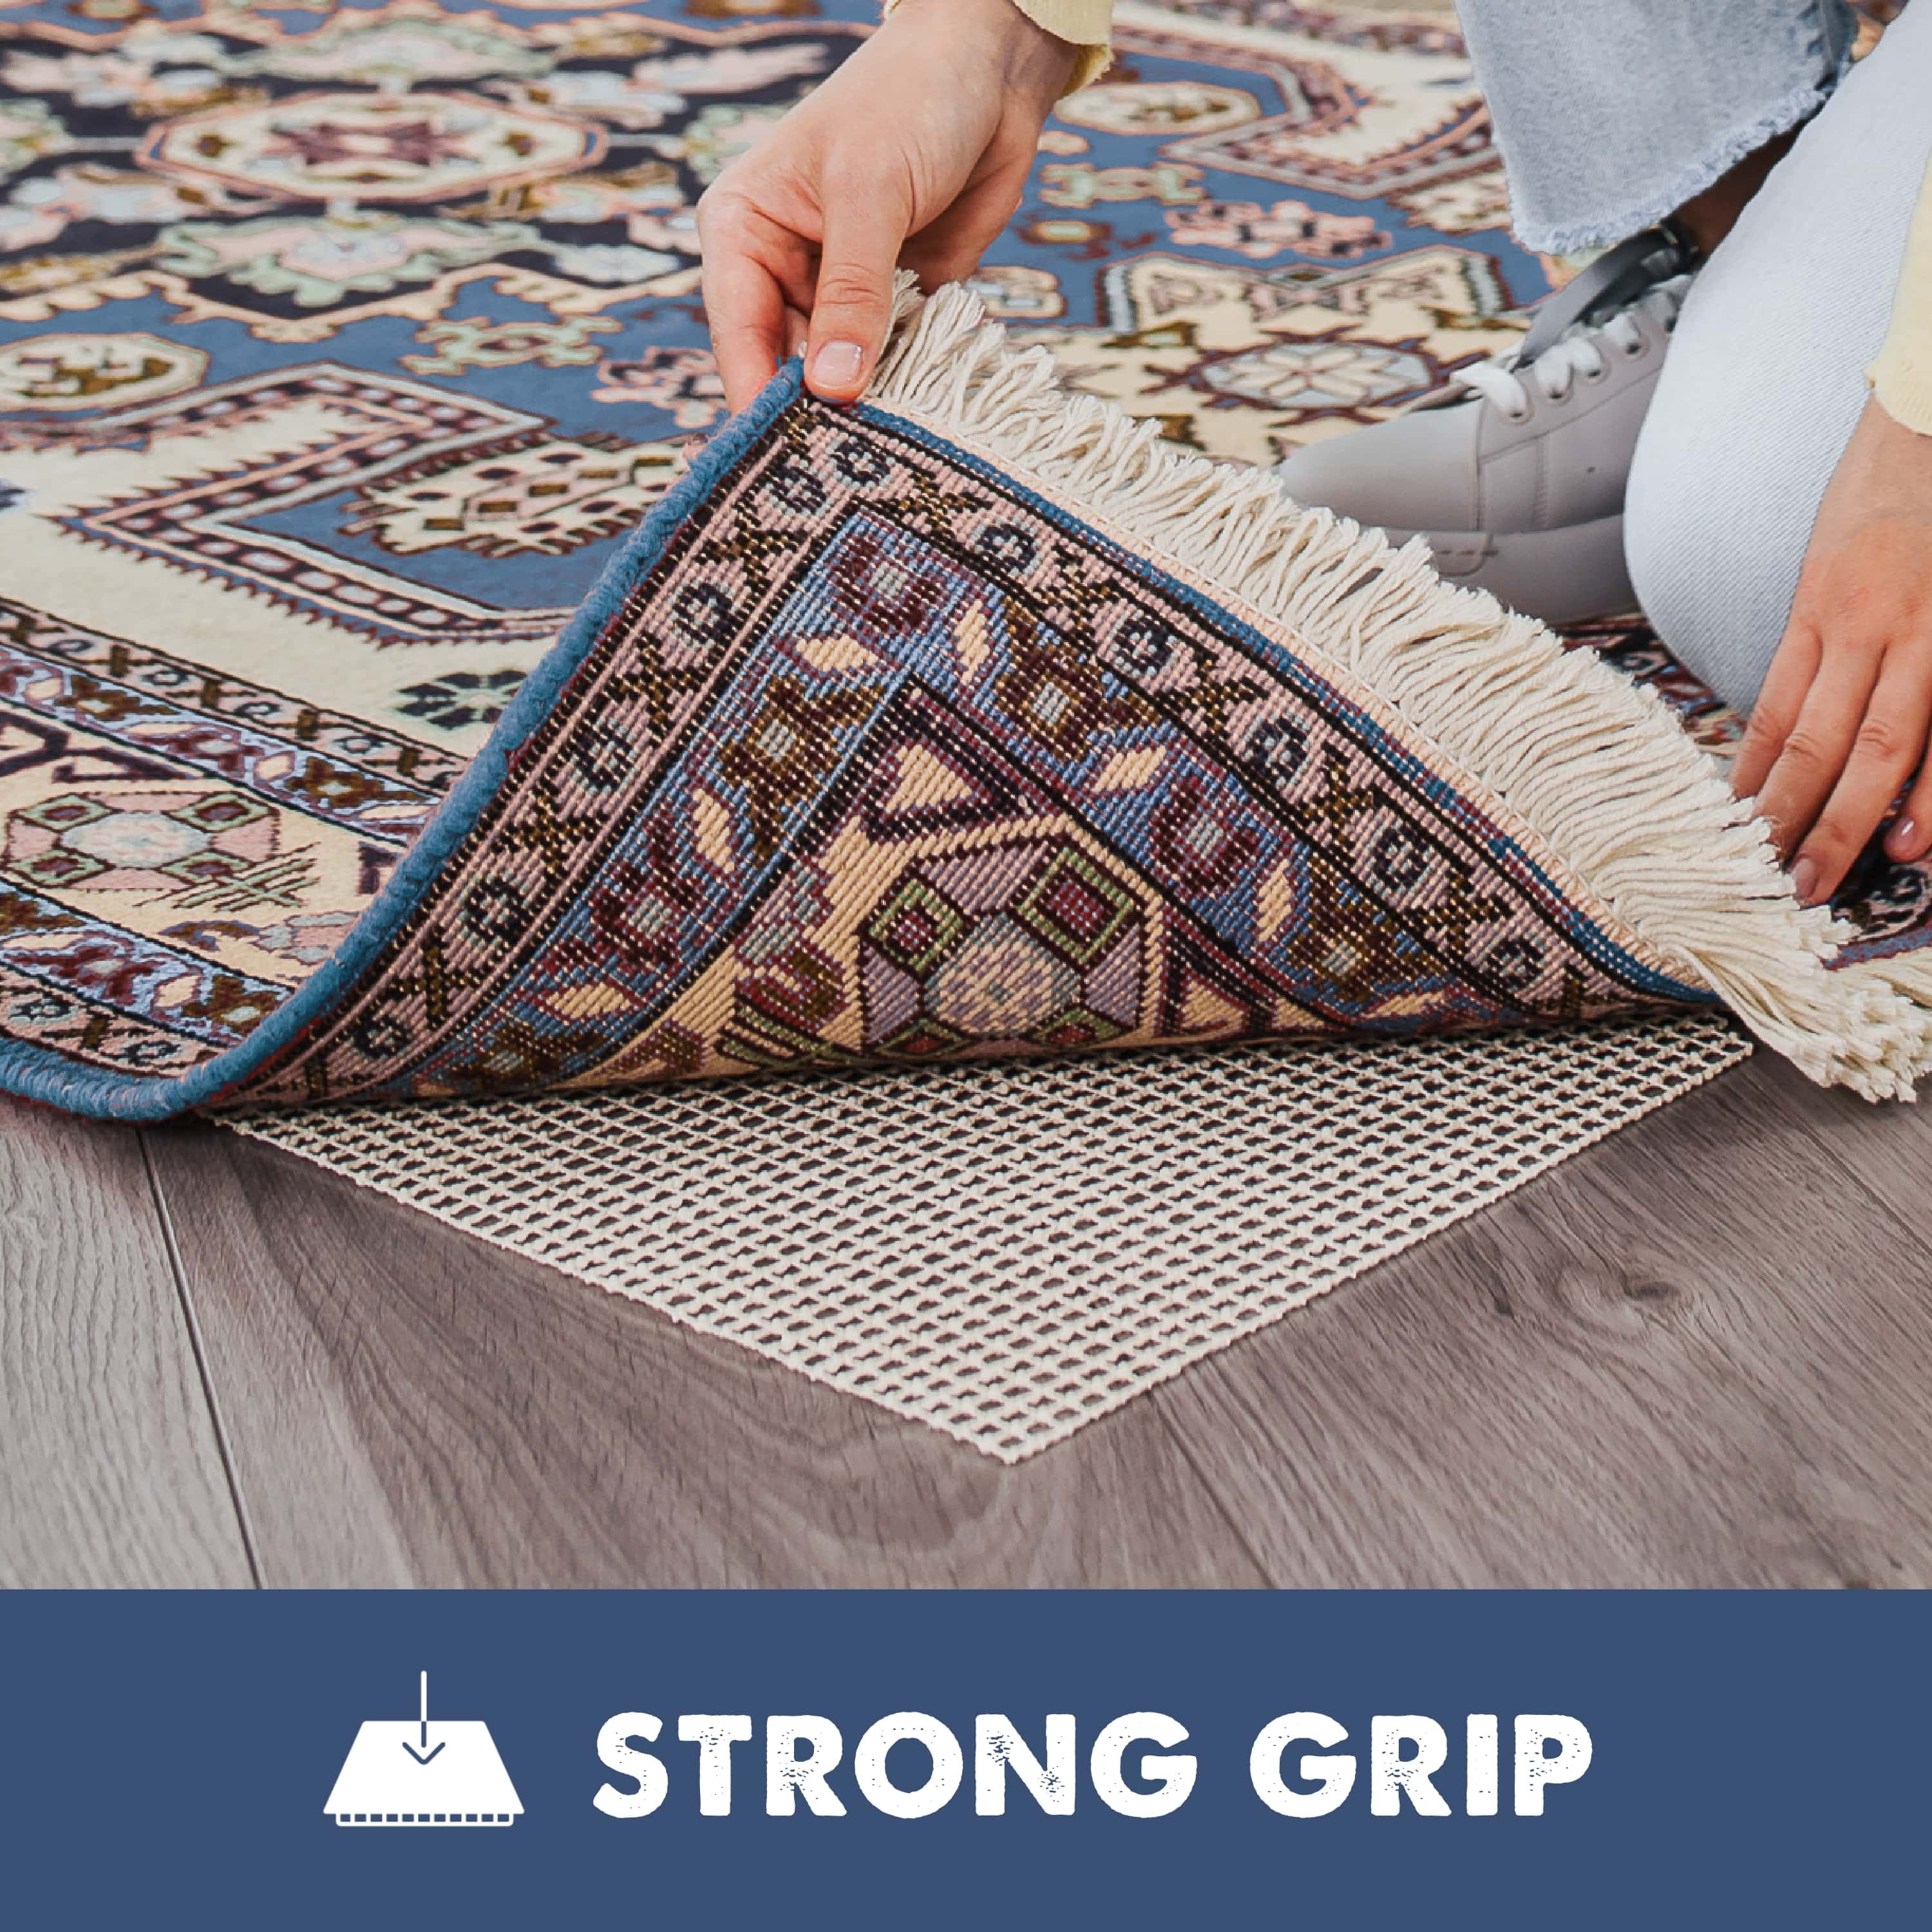 Super Grip Natural Non Slip Rug Pad 3 x 5 ft by Slip-Stop